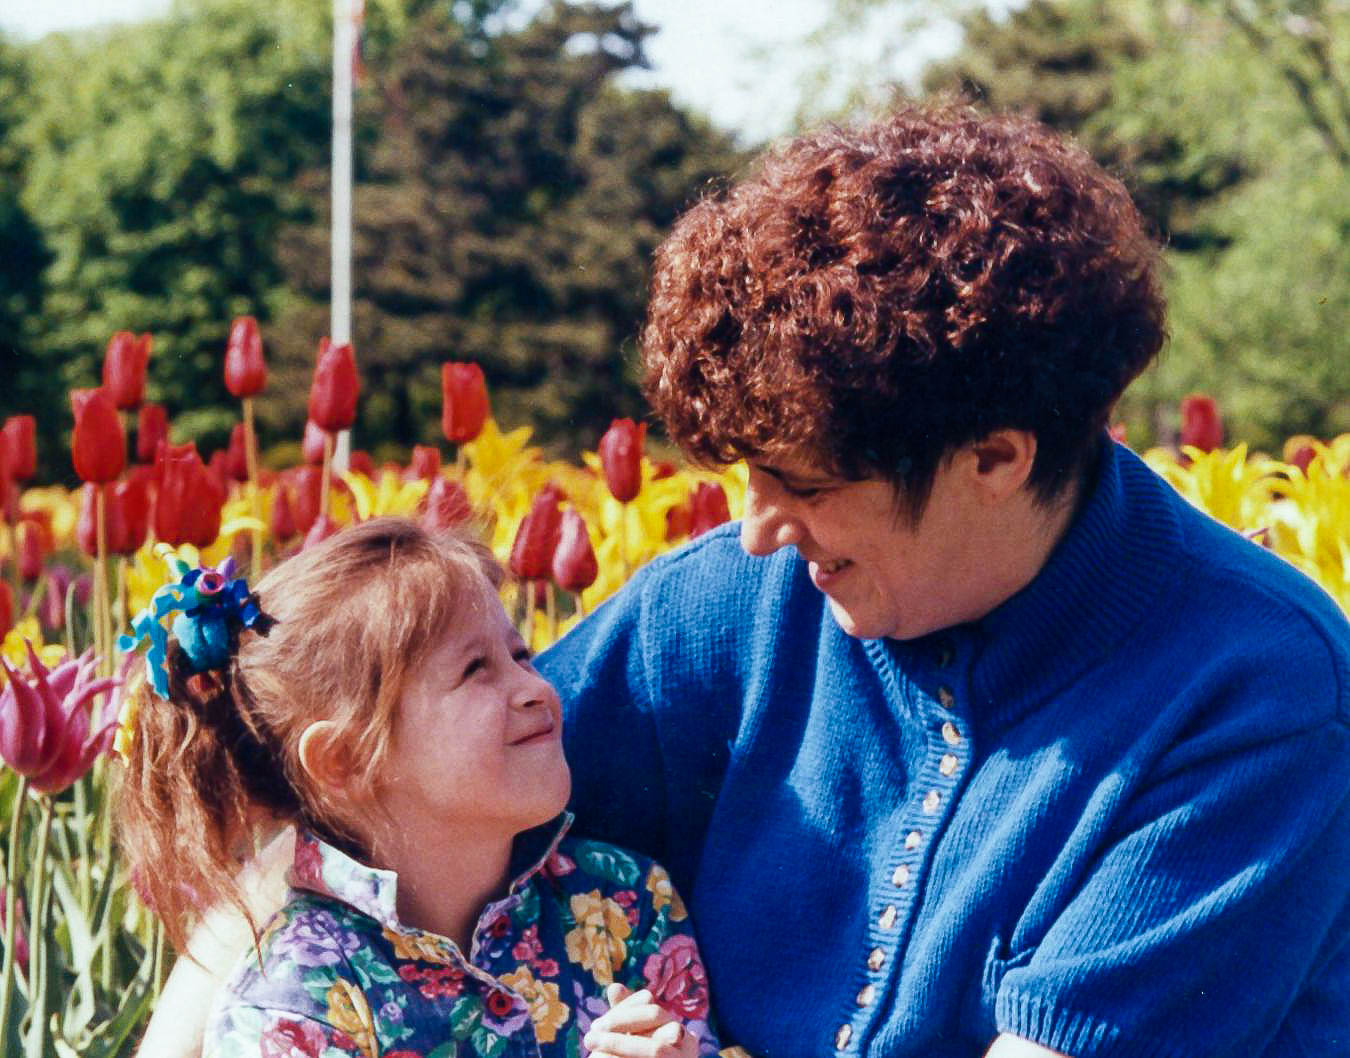 Daughter and mother enjoy Albany’s Washington Park, 1991. 

AIDS